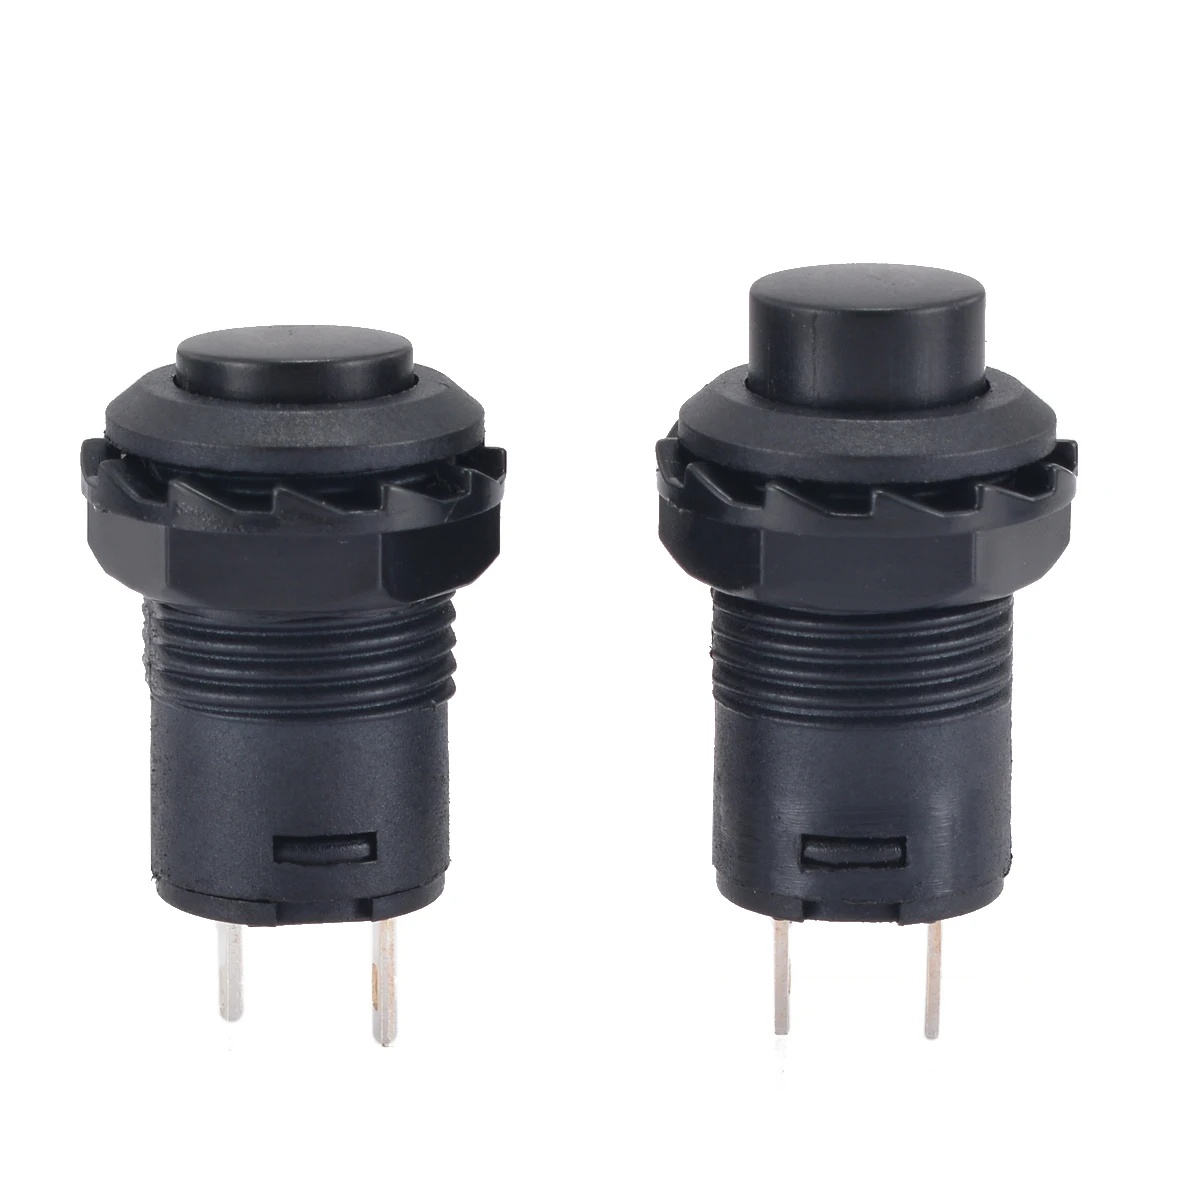 1/5 Pcs Push Button Switch Momentary Waterproof 16mm 12V 3A/250VAC For Car Boat 